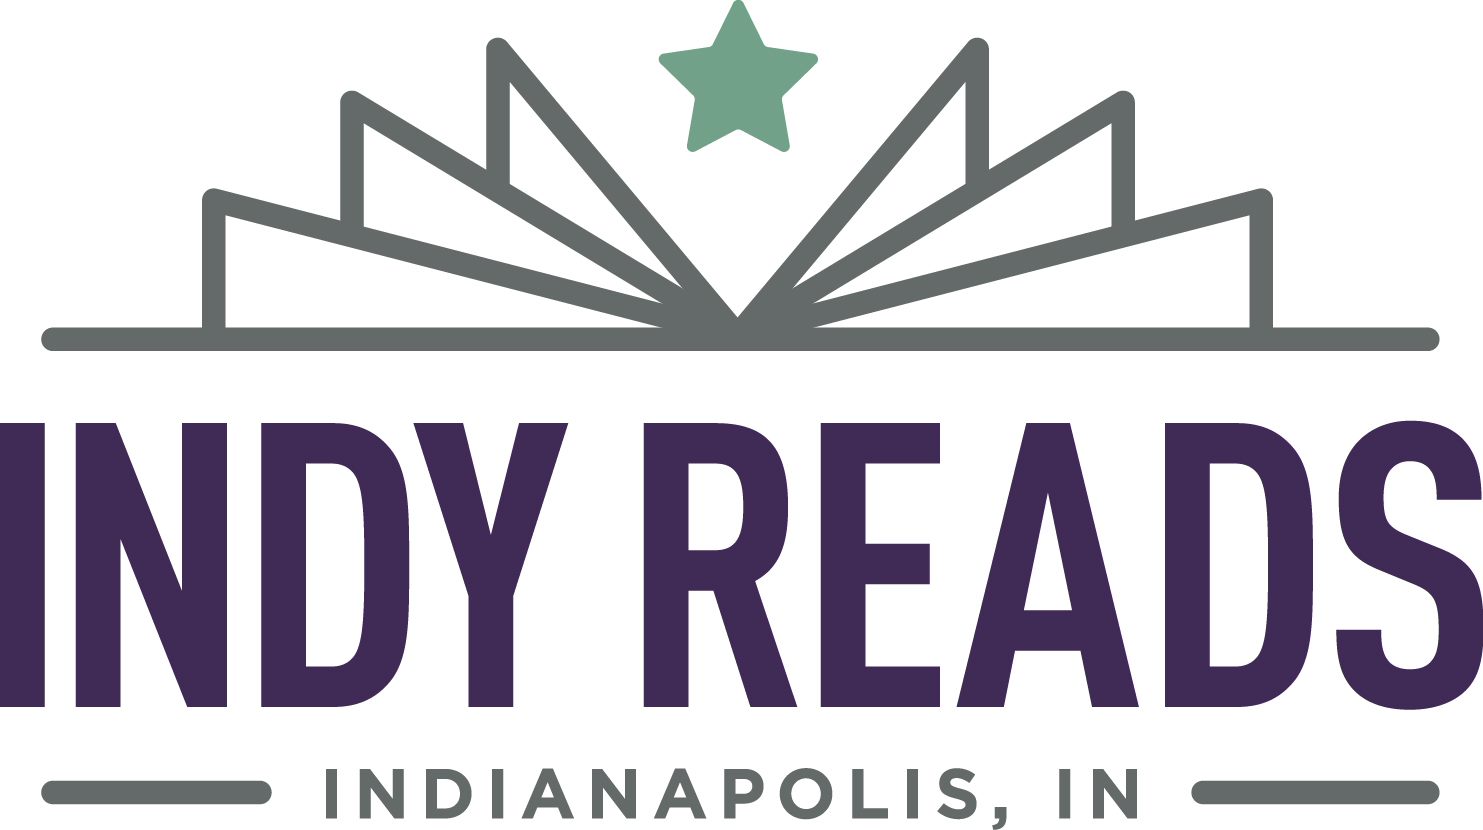 Indy Reads